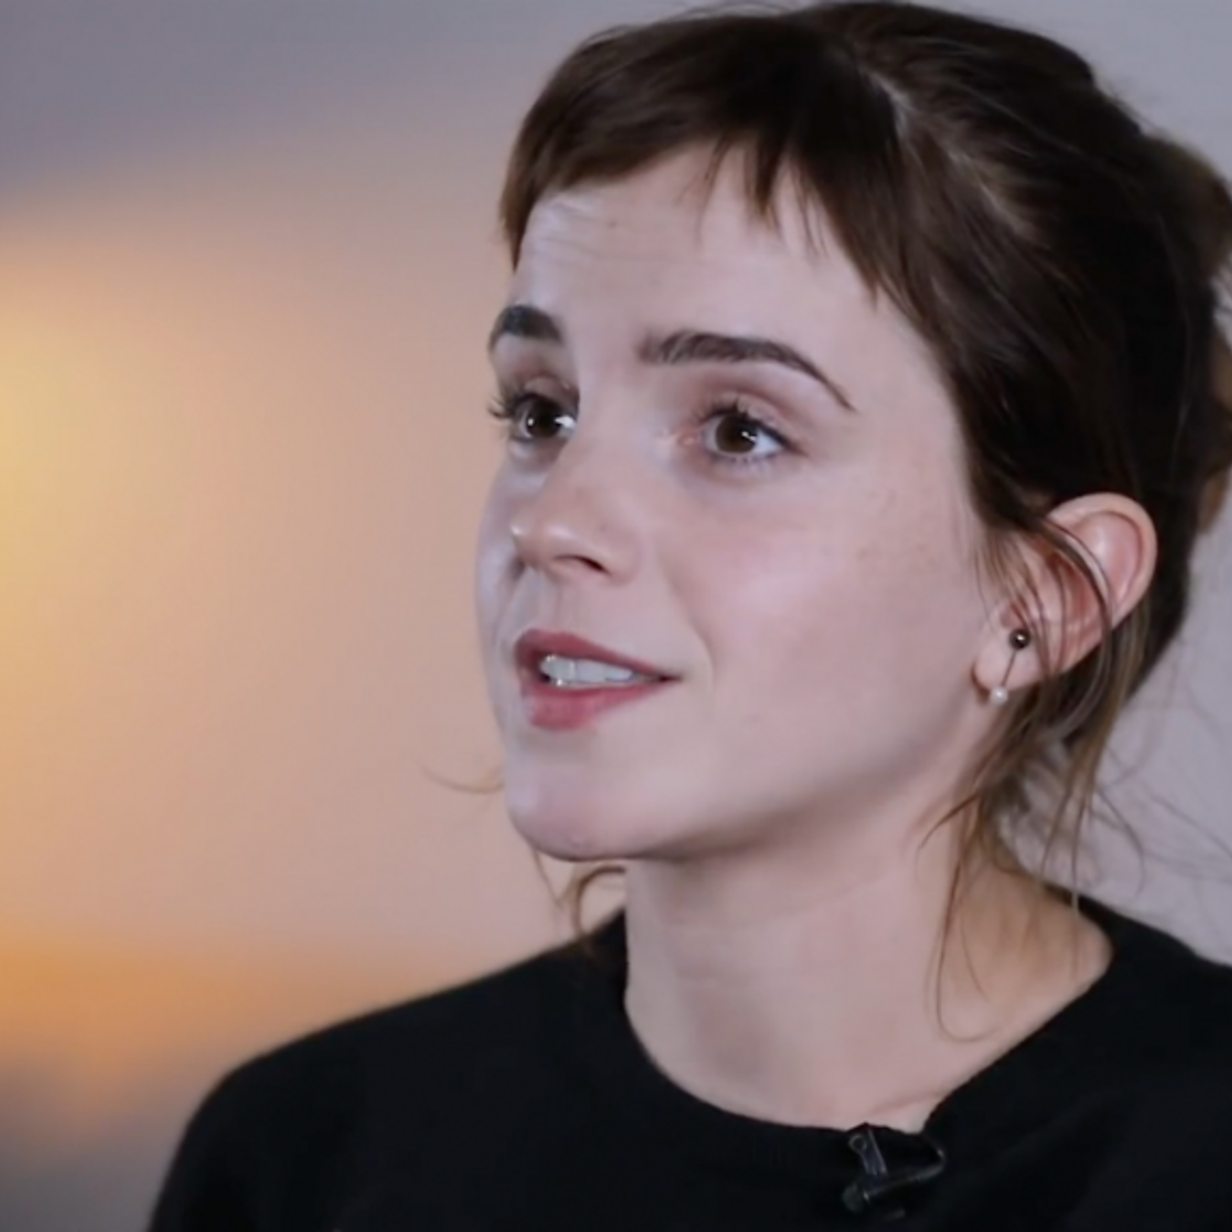 Emma Watson welcomes sex harassment rules - BBC News